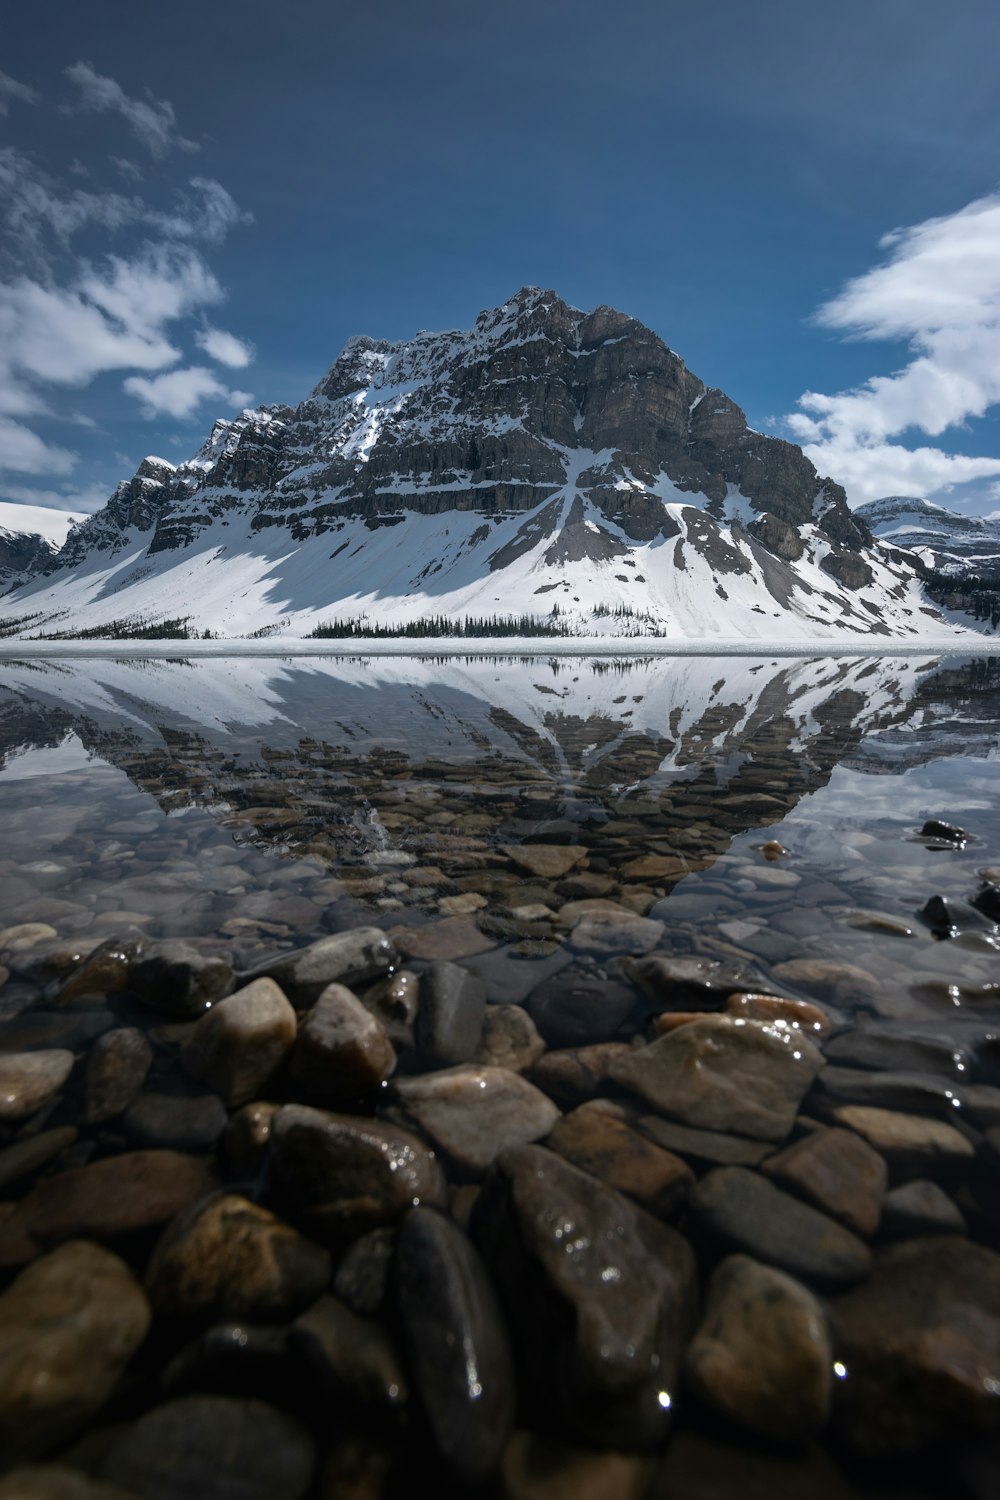 a snowy mountain with rocks and water